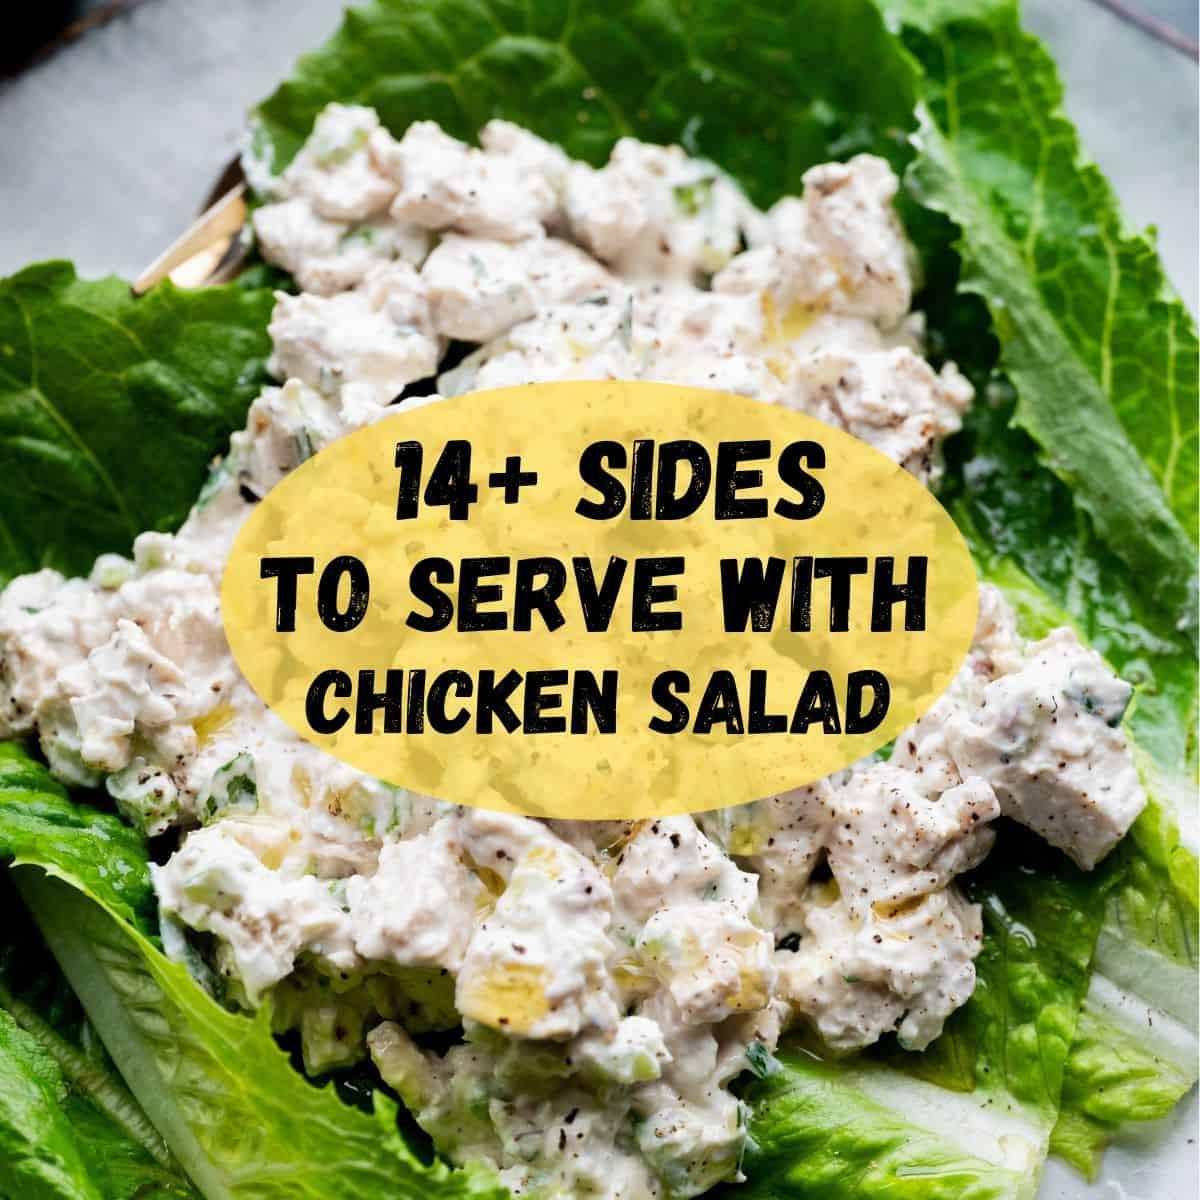 Image of chicken salad with text overlay that says "14+ sides to serve with chicken salad".